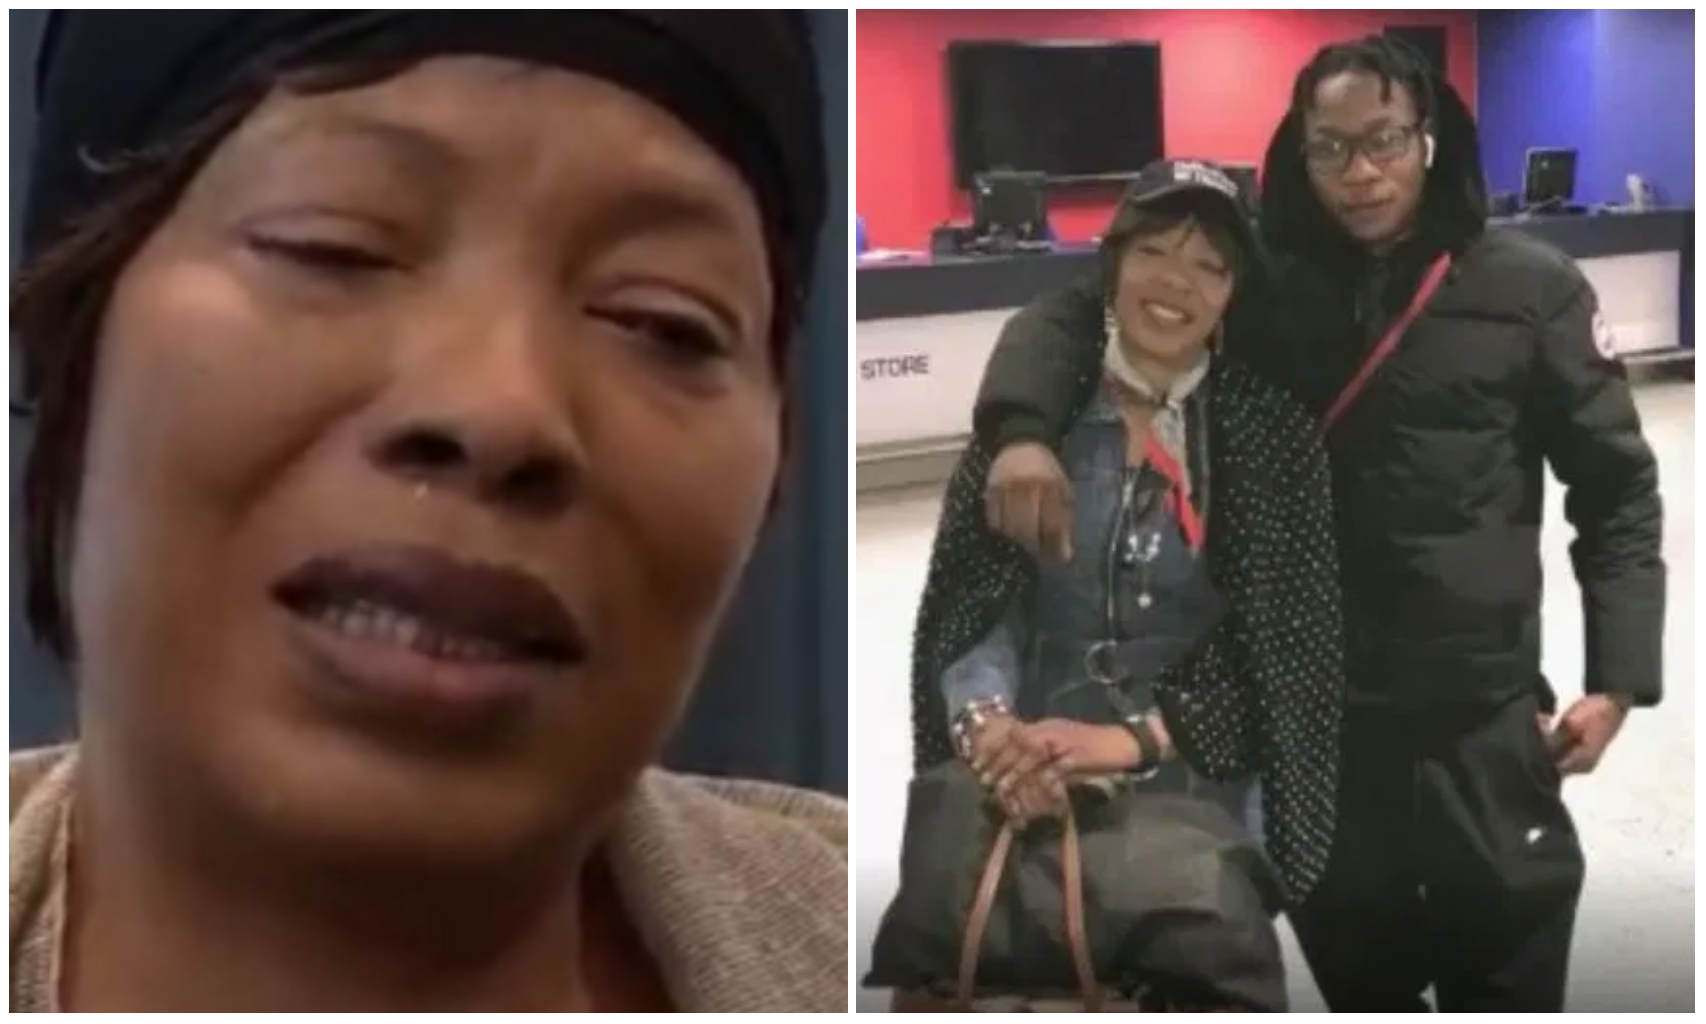 "If you know who killed my brother come forward" - BBNaija's Khafi and mother appeals (Video)